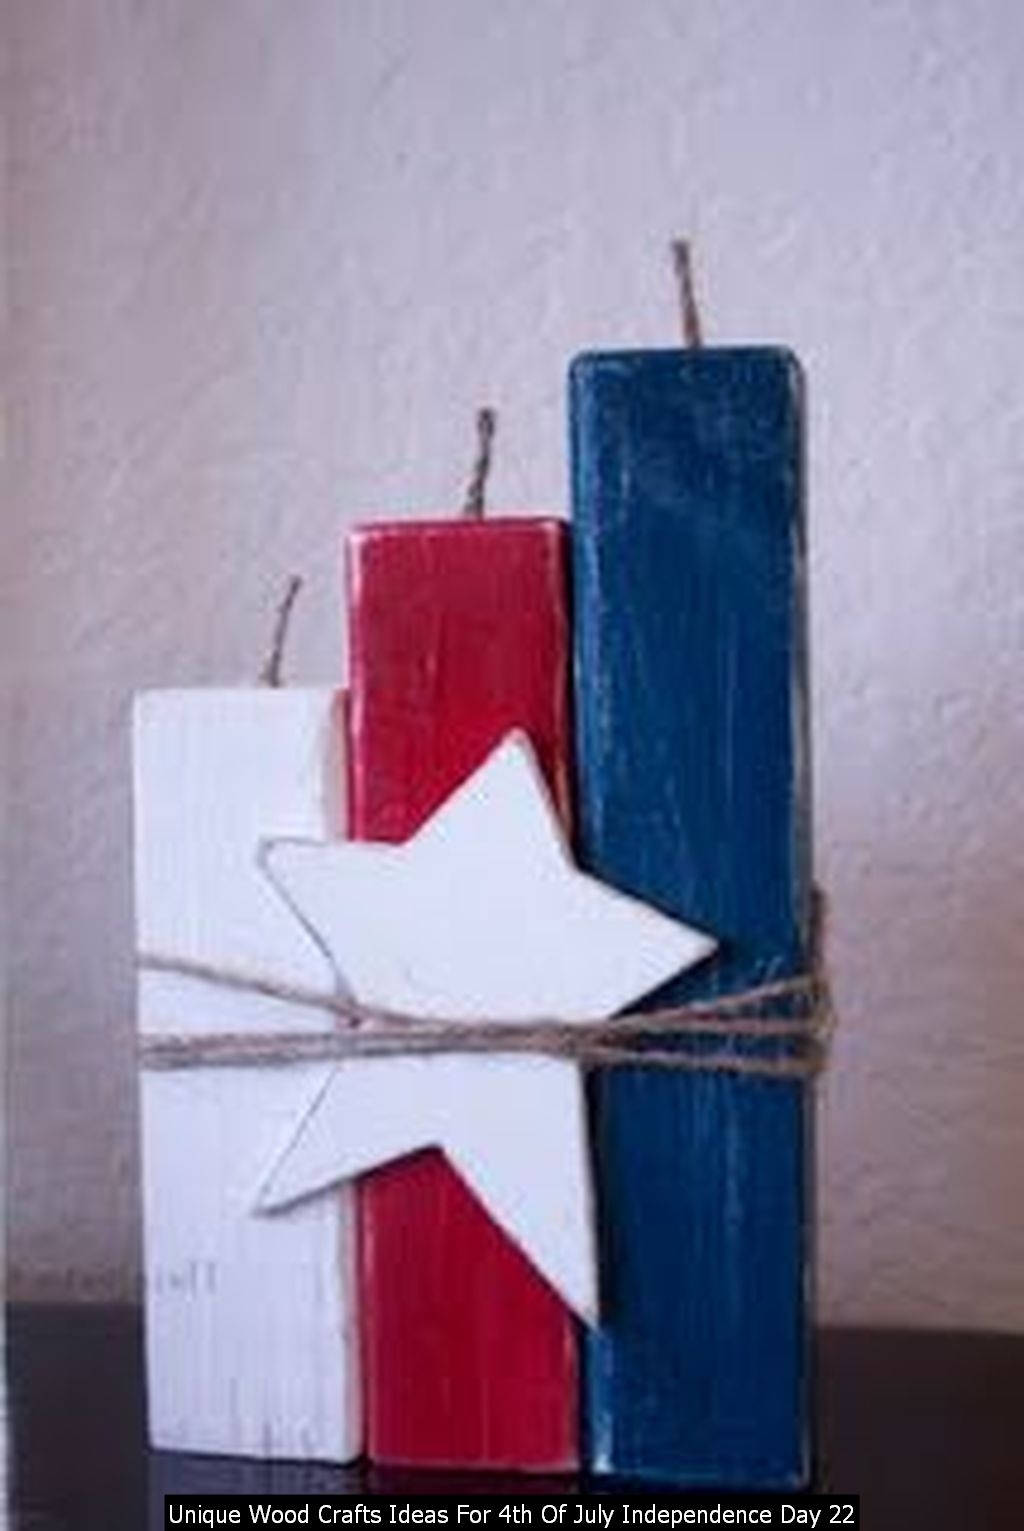 Unique Wood Crafts Ideas For 4th Of July Independence Day 22